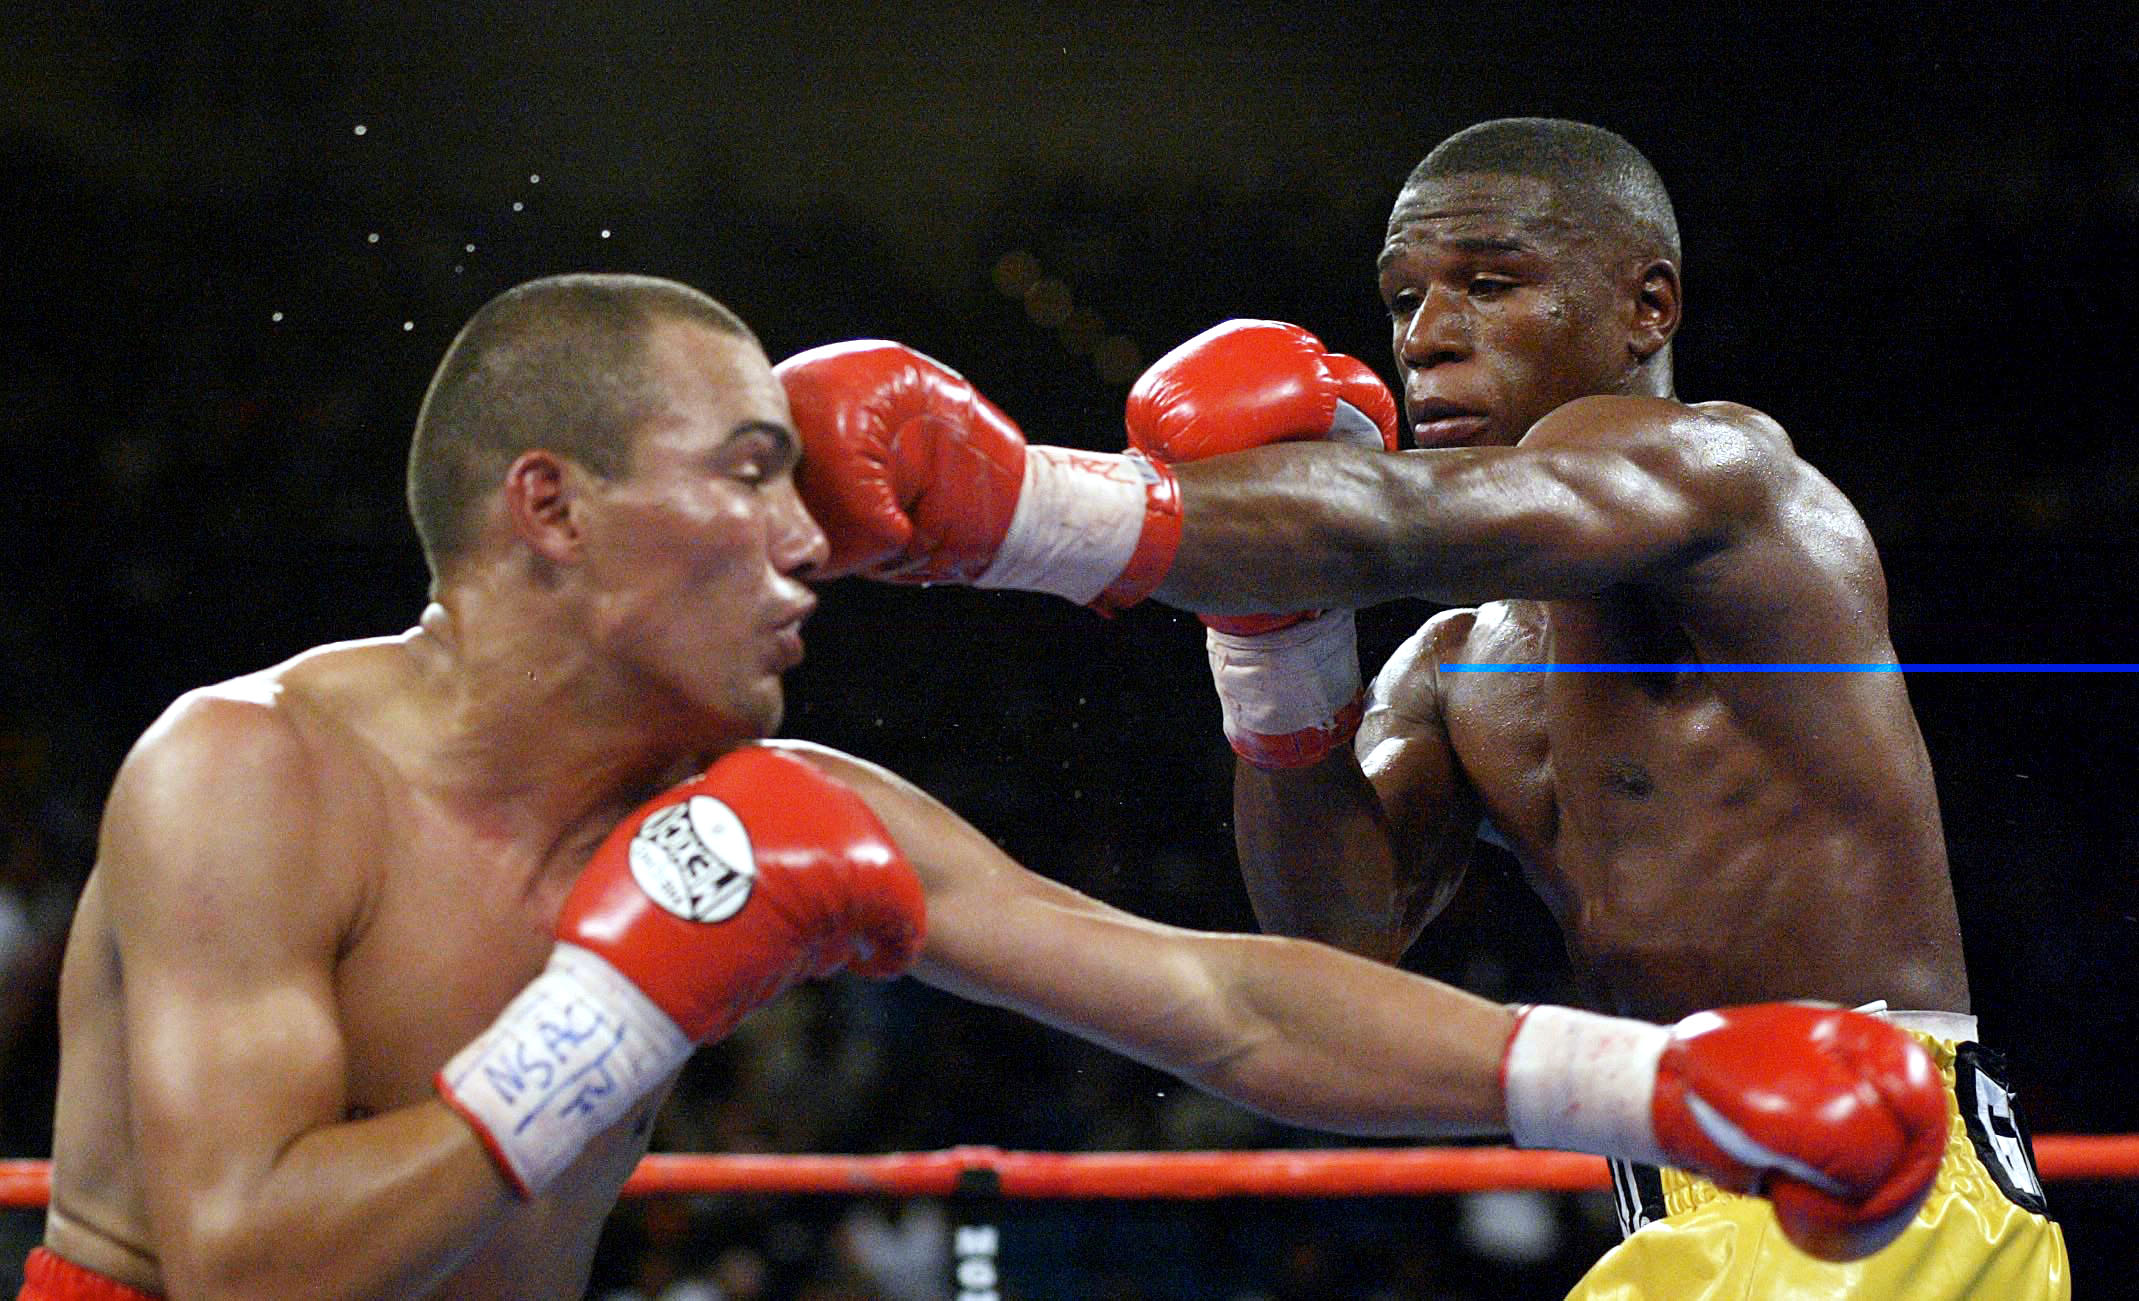 20 Apr 2002:   Floyd Mayweather (right) hits Jose Luis Castillo during the WBC Lightweight Championship at the MGM Grand Garden Arena in Las Vegas, Nevada.    DIGITAL IMAGE    Mandatory Credit: Jed Jacobsohn\\Getty Images